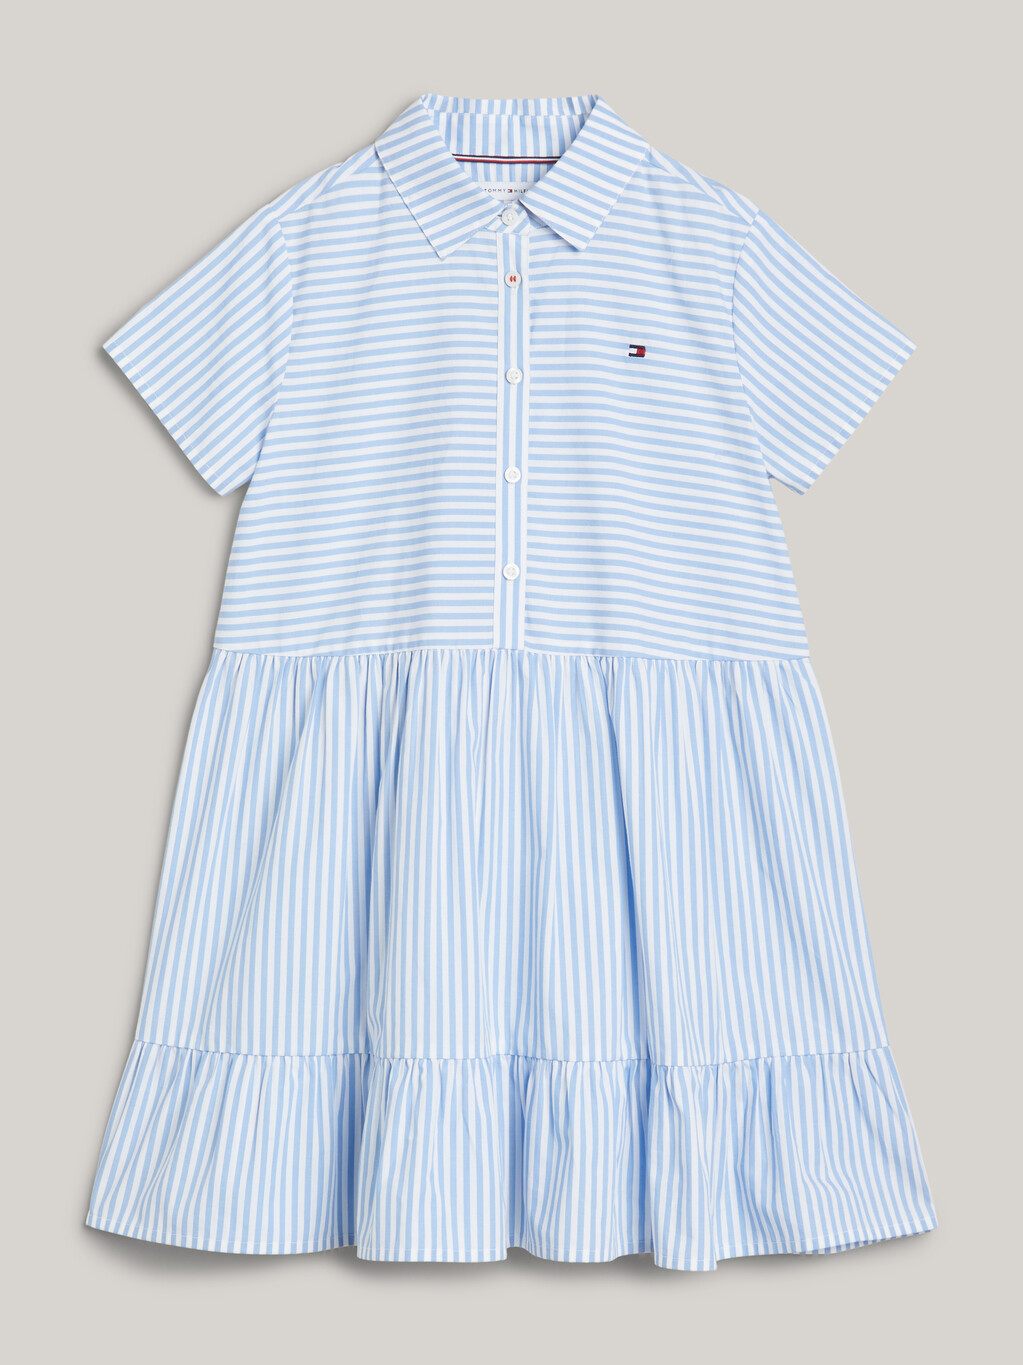 Ithaca Stripe Fit And Flare Dress, Blue Spell Stripe / White, hi-res